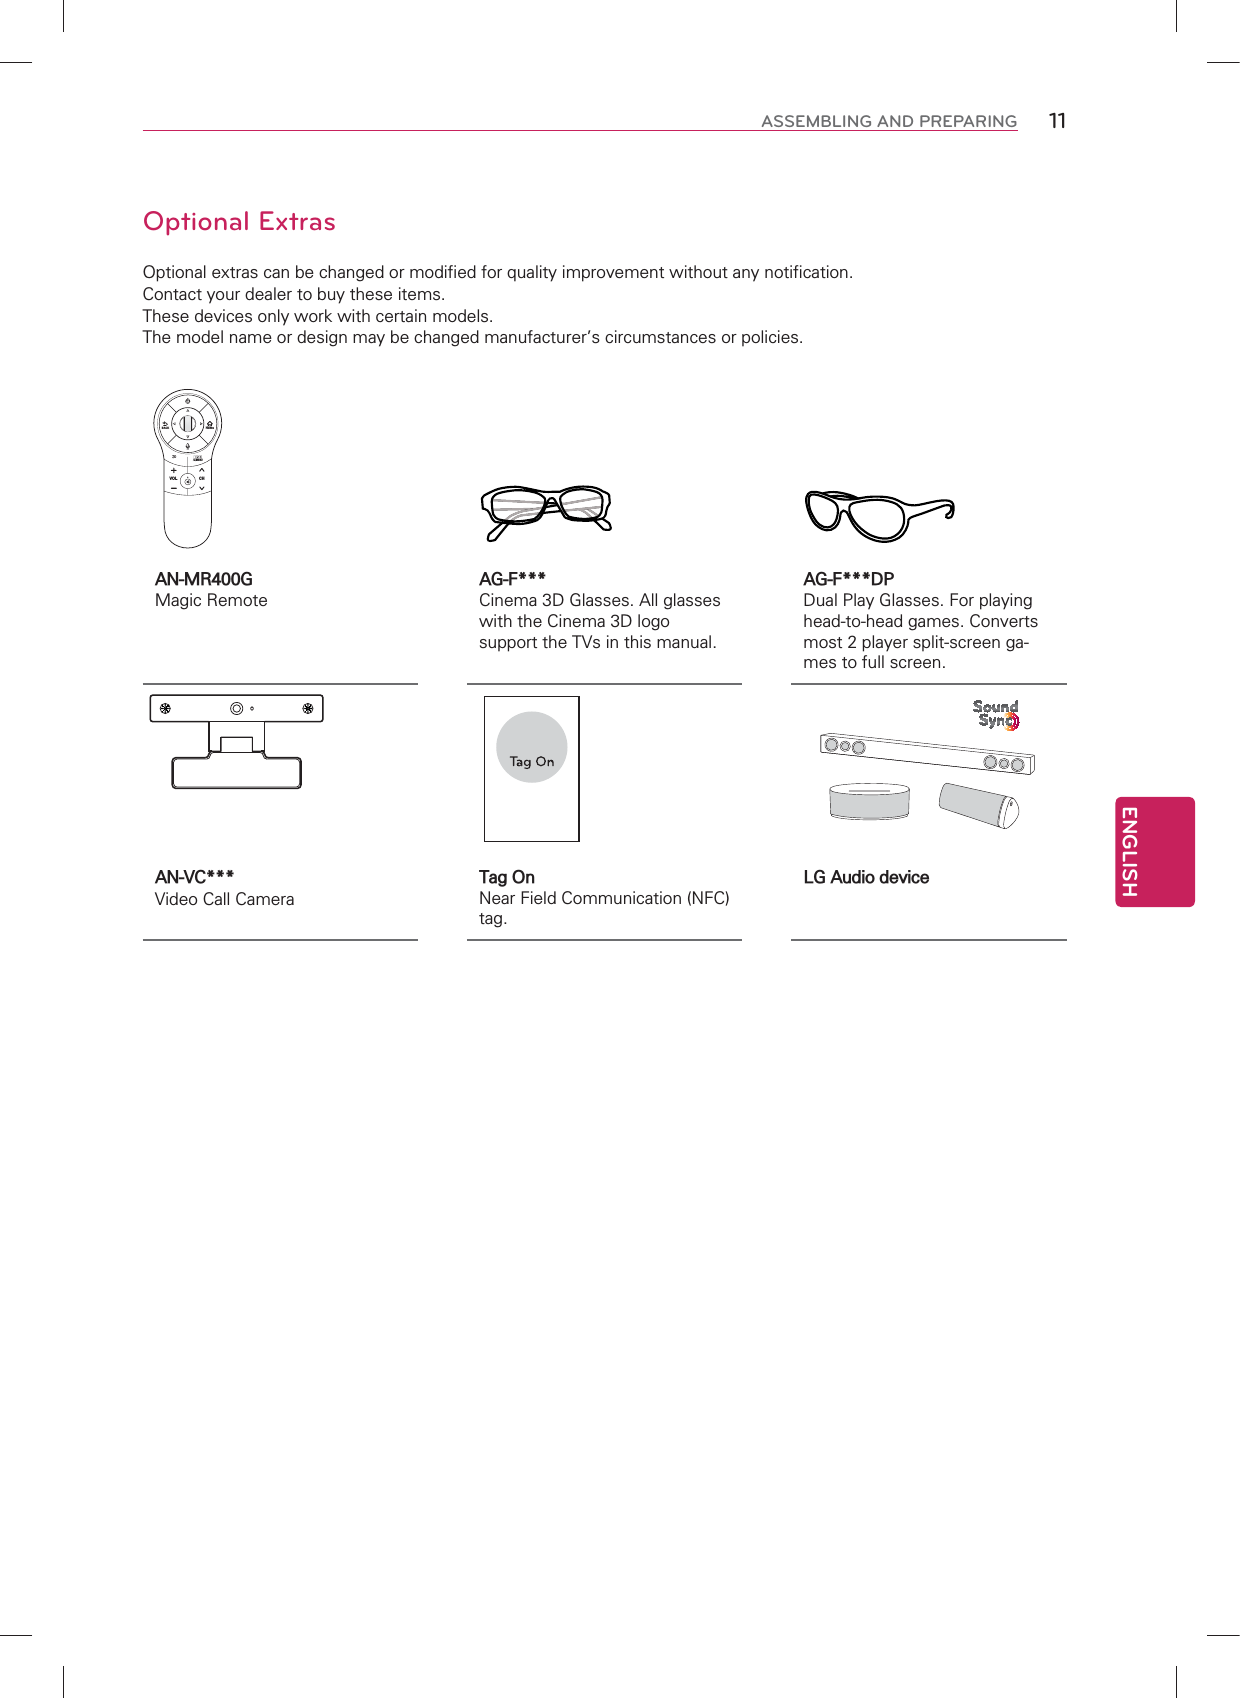 ENGLISH11ASSEMBLING AND PREPARINGOptional ExtrasOptional extras can be changed or modified for quality improvement without any notification.Contact your dealer to buy these items.These devices only work with certain models.The model name or design may be changed manufacturer’s circumstances or policies.AN-MR400G Magic RemoteAG-F***Cinema 3D Glasses. All glasses with the Cinema 3D logo support the TVs in this manual.AG-F***DPDual Play Glasses. For playing head-to-head games. Converts most 2 player split-screen ga-mes to full screen.AN-VC*** Video Call CameraTag OnNear Field Communication (NFC) tag.LG Audio deviceCHVOL/Q.MENUBACKHome